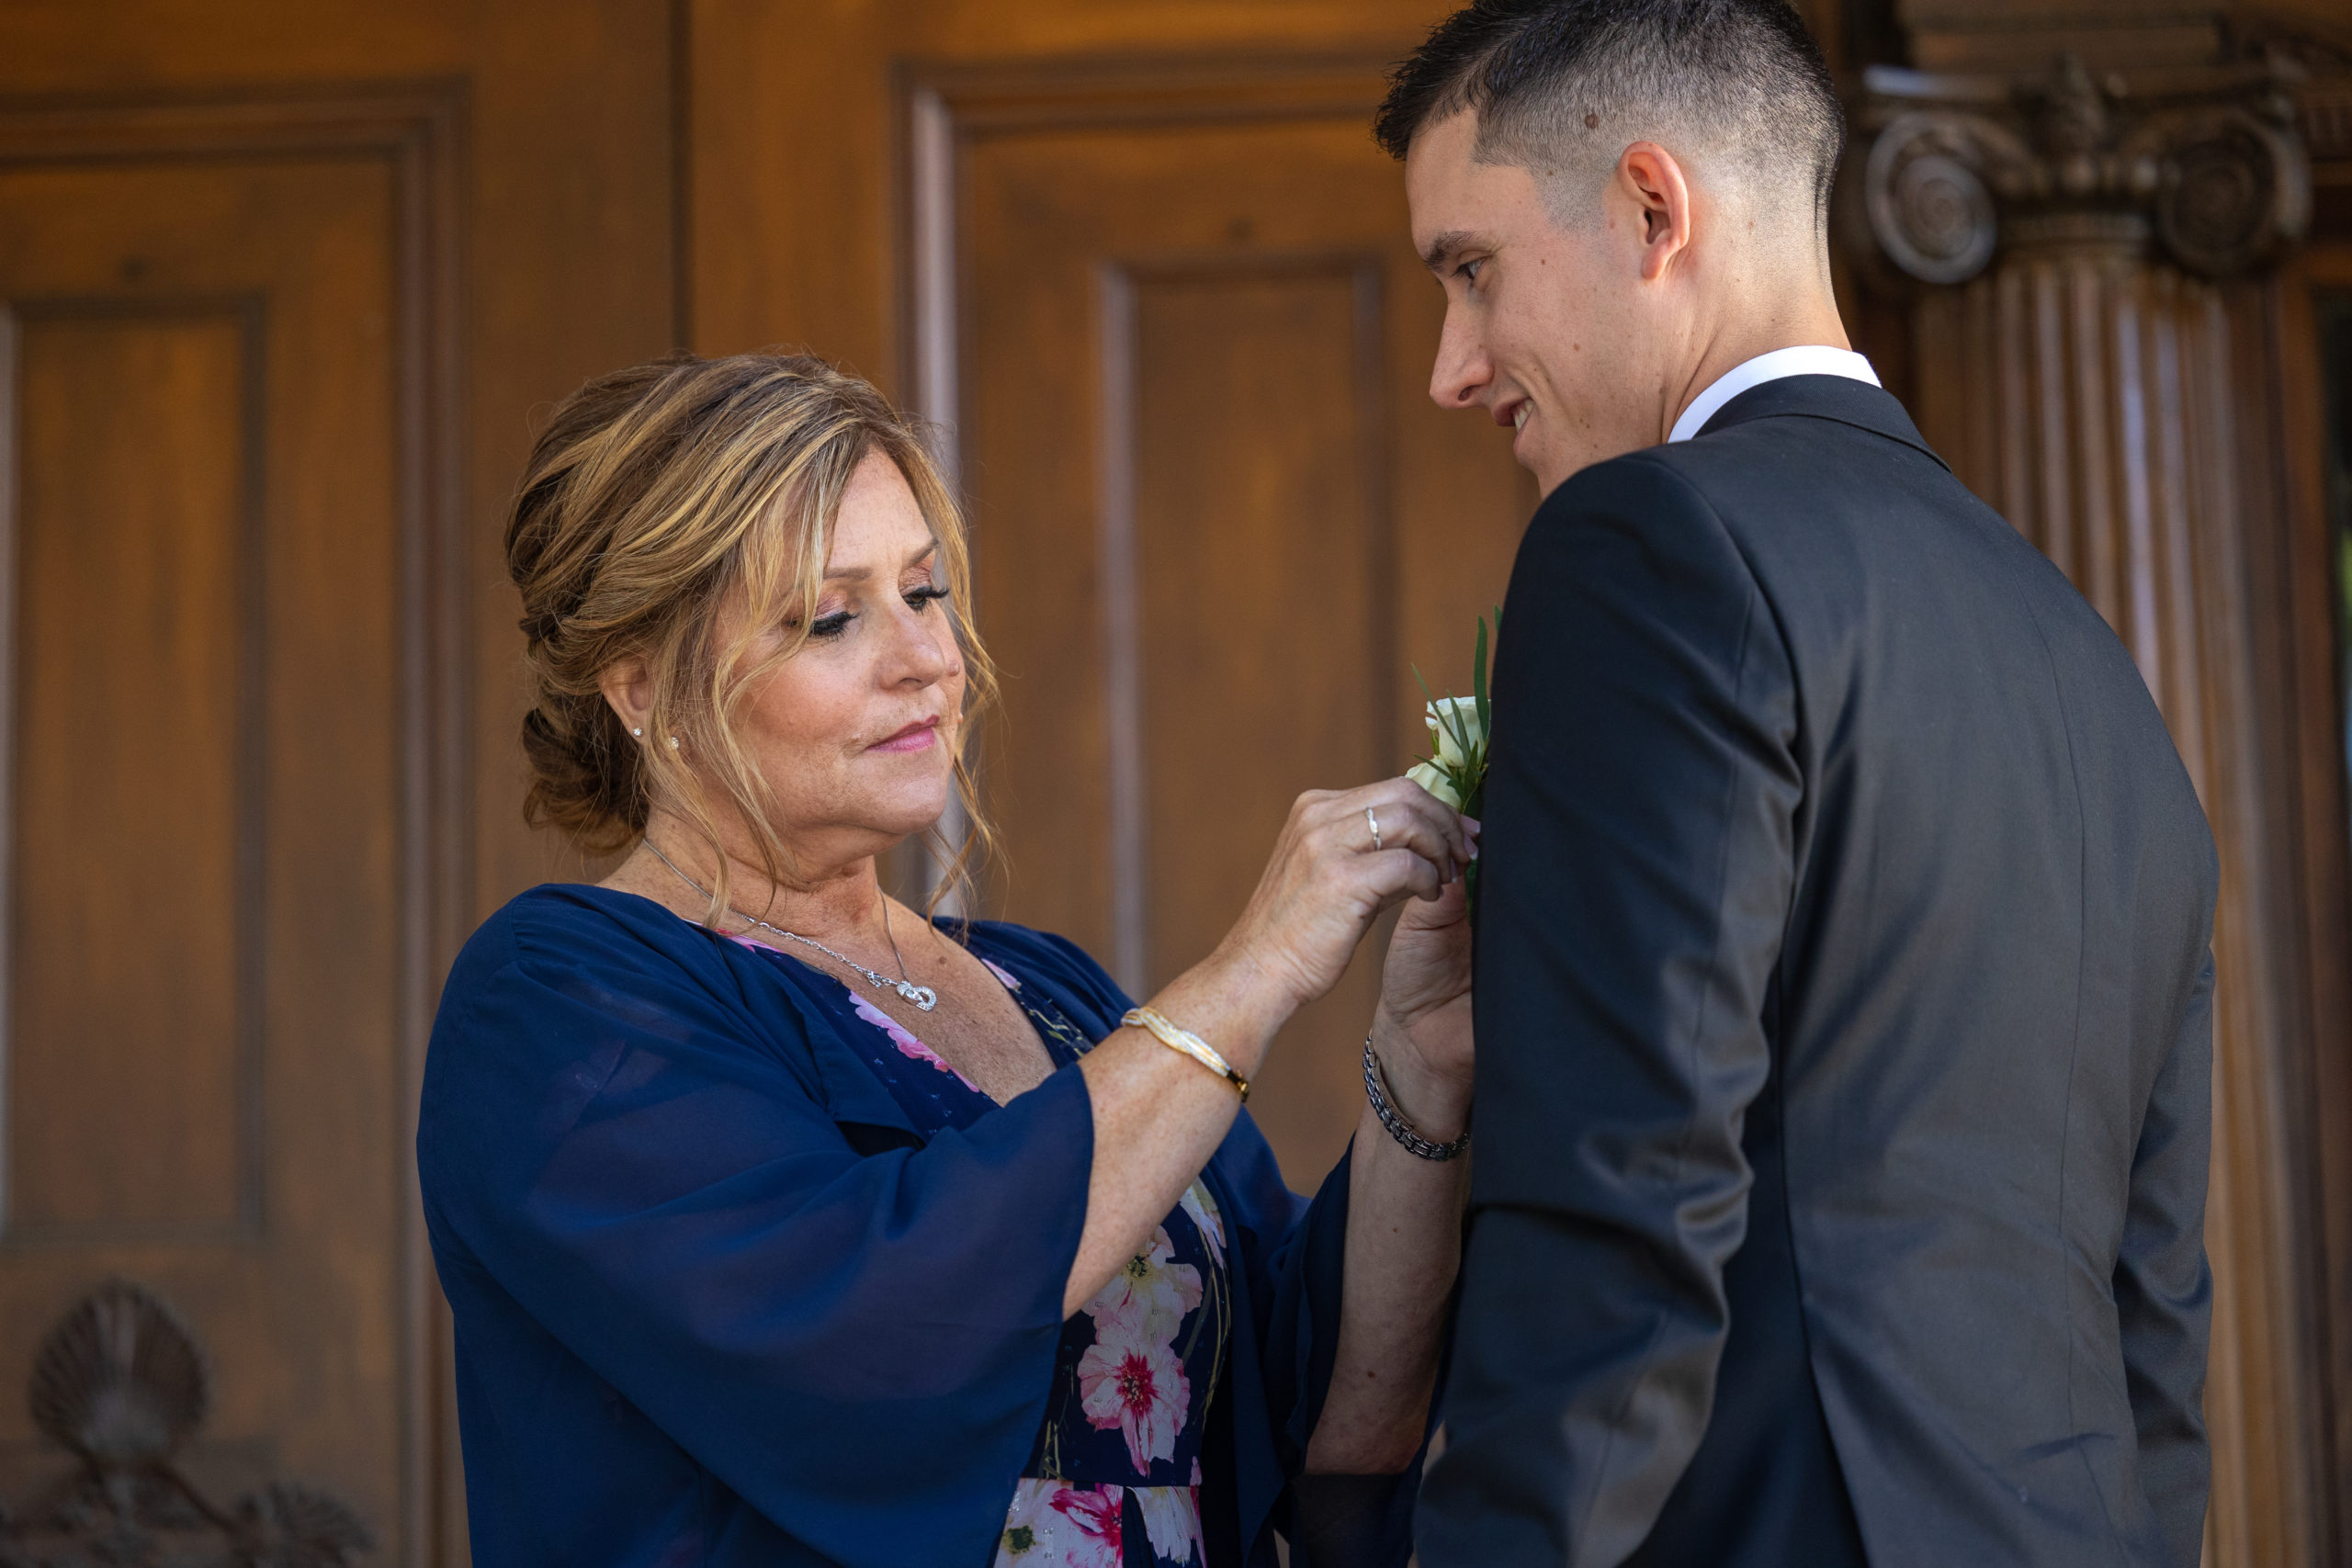 mom puts boutonnière on groom before wedding at Westmoreland Club